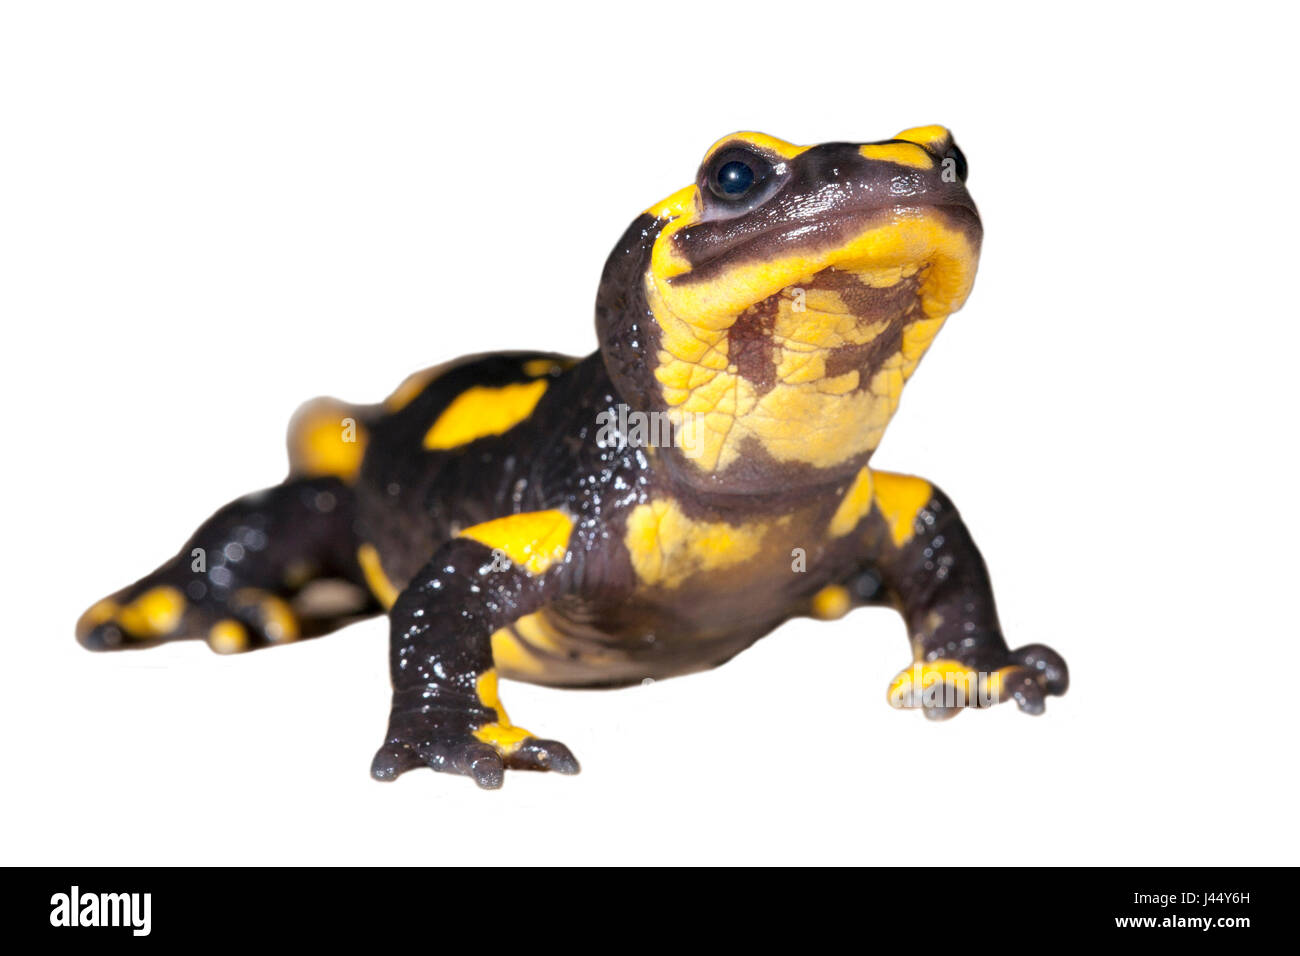 Fire salamander against white background (rendered); Stock Photo